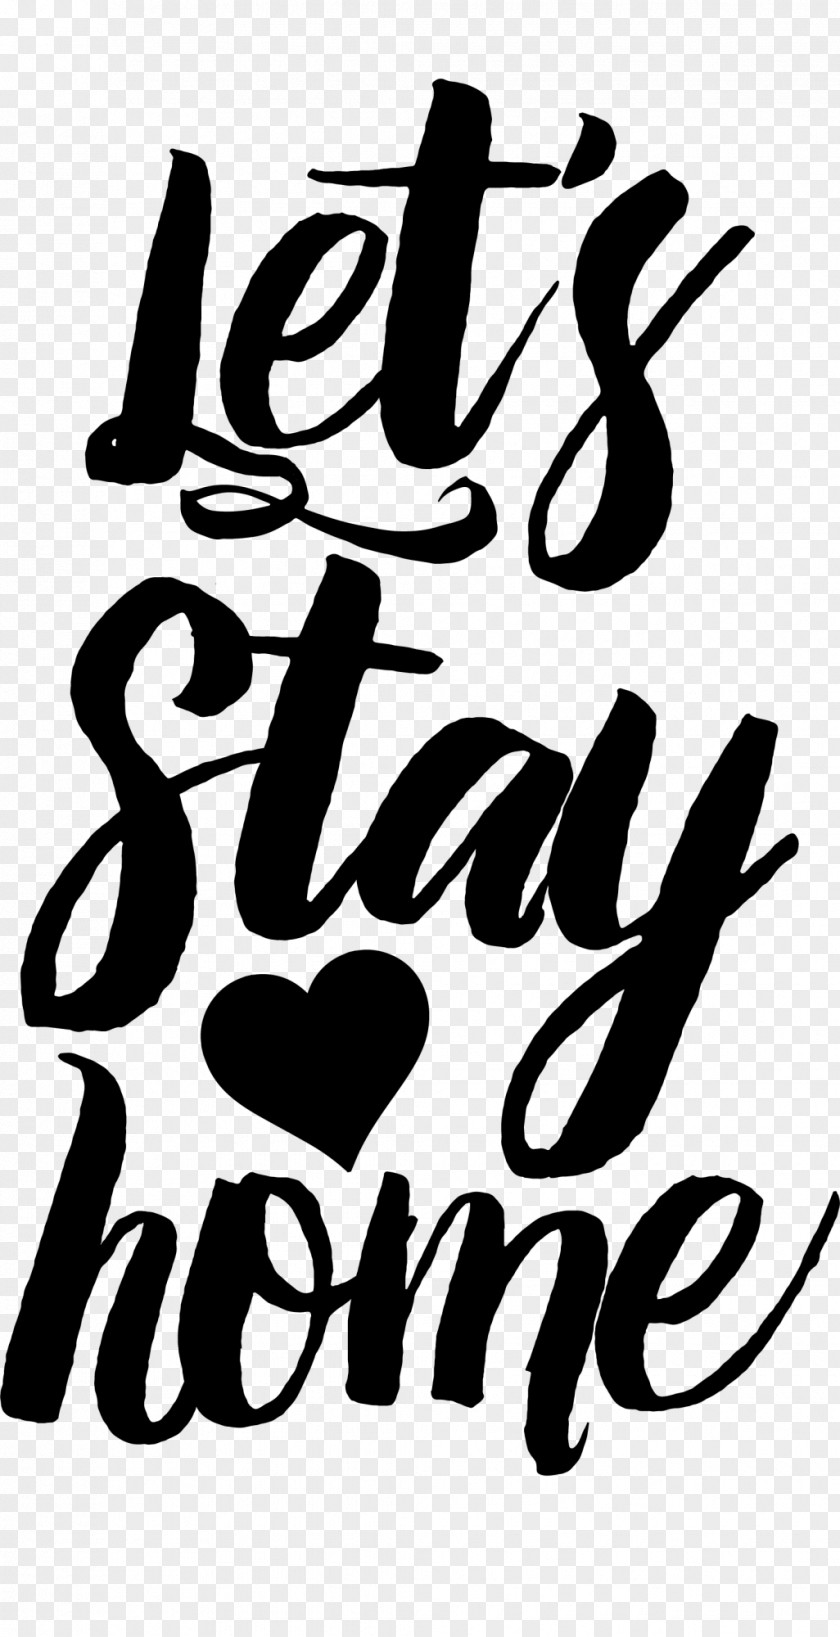 Lets Stay Home Silhouette Logo Graphic Design PNG